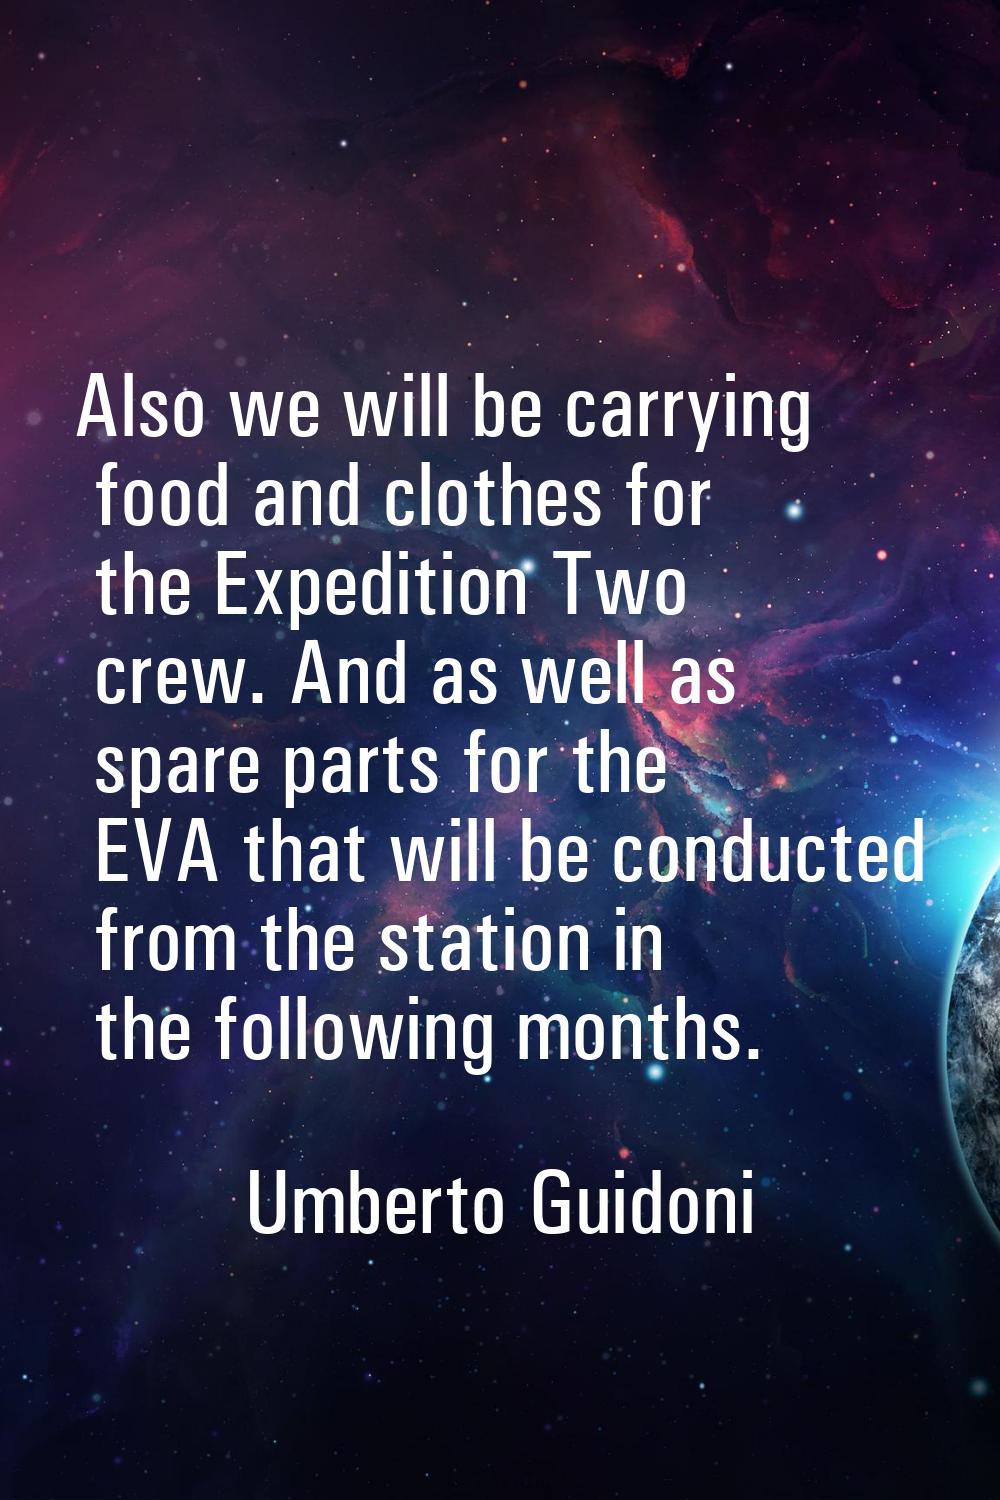 Also we will be carrying food and clothes for the Expedition Two crew. And as well as spare parts f